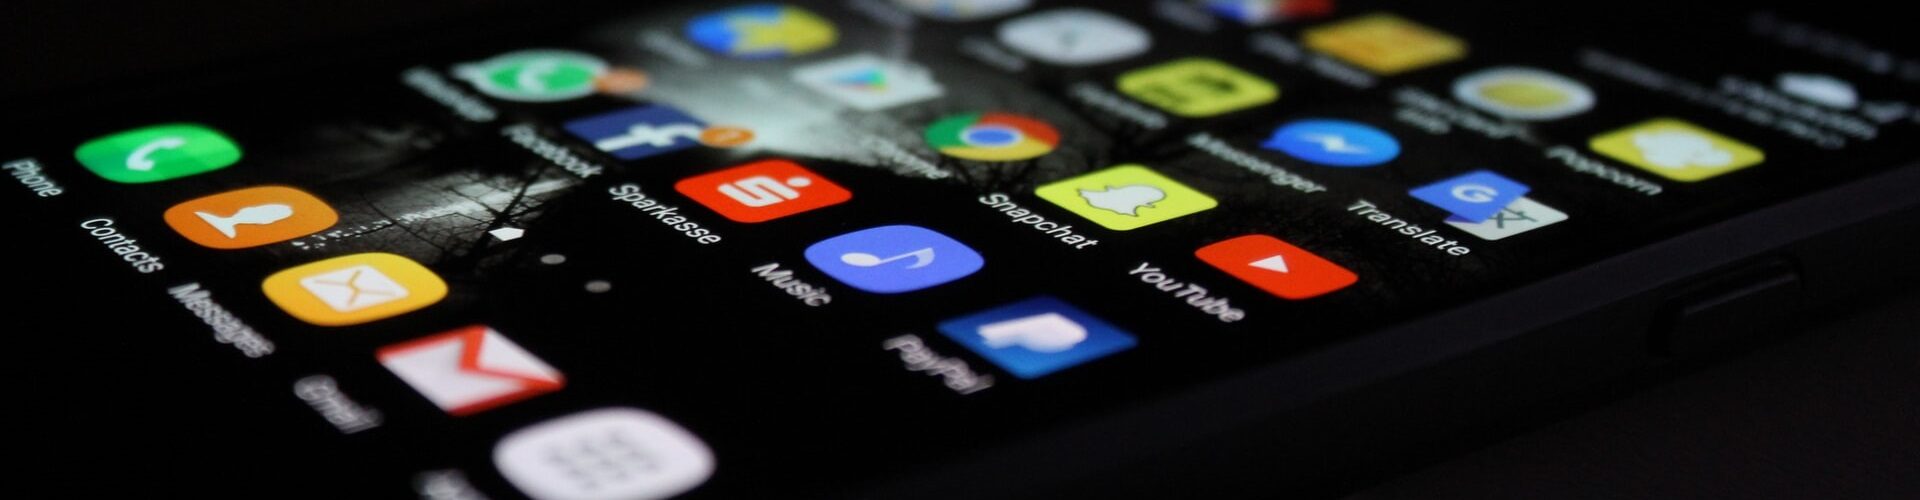 3 Important Facts You Should Know About Apps